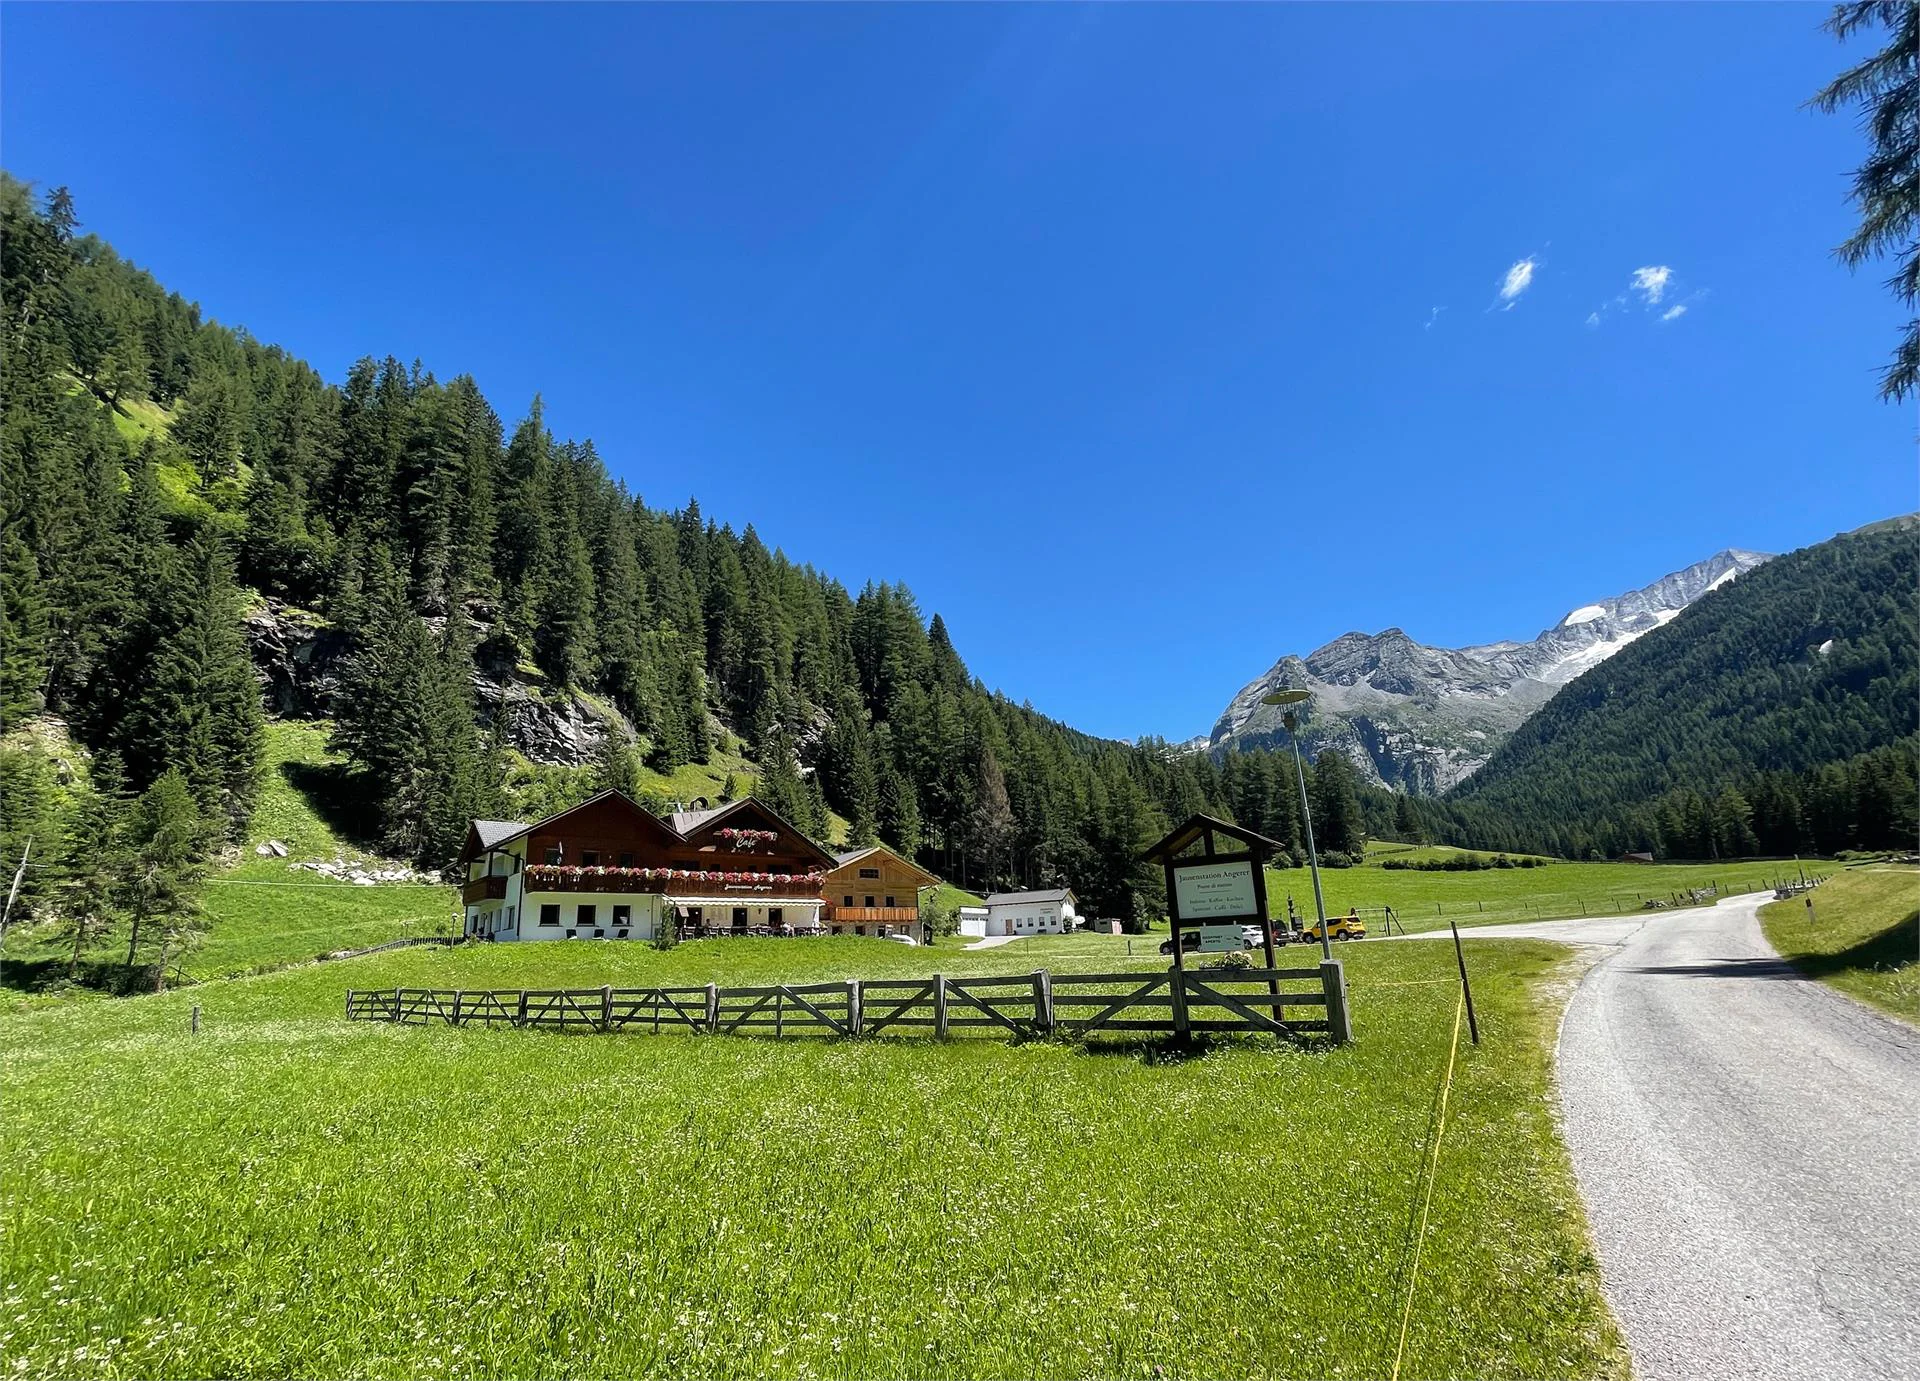 Angerer Campo Tures 6 suedtirol.info